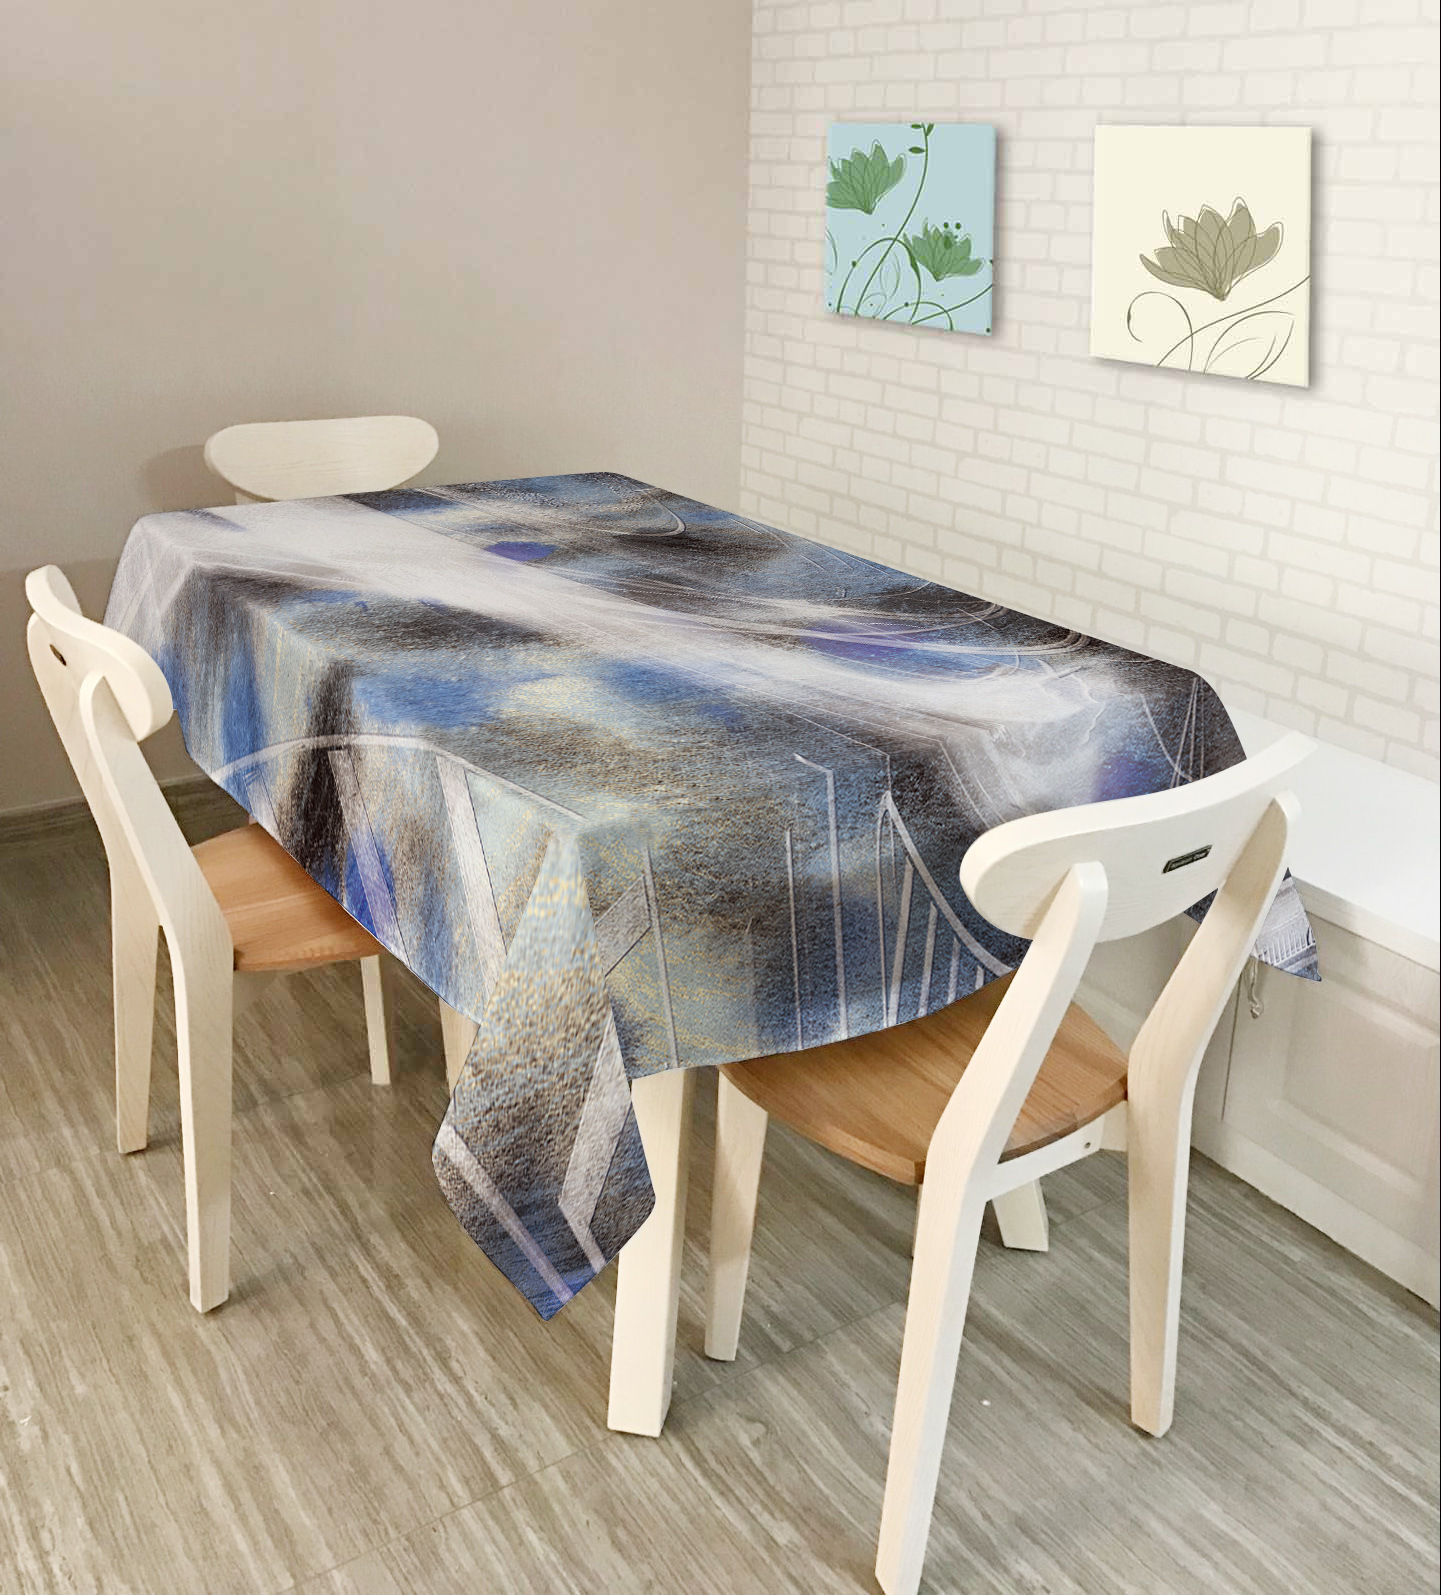 American-Style-Creative-Landscape-Tablecloth-Waterproof-Oil-Proof-Tea-Tablecloth-Home-Party-Decor-1185731-4